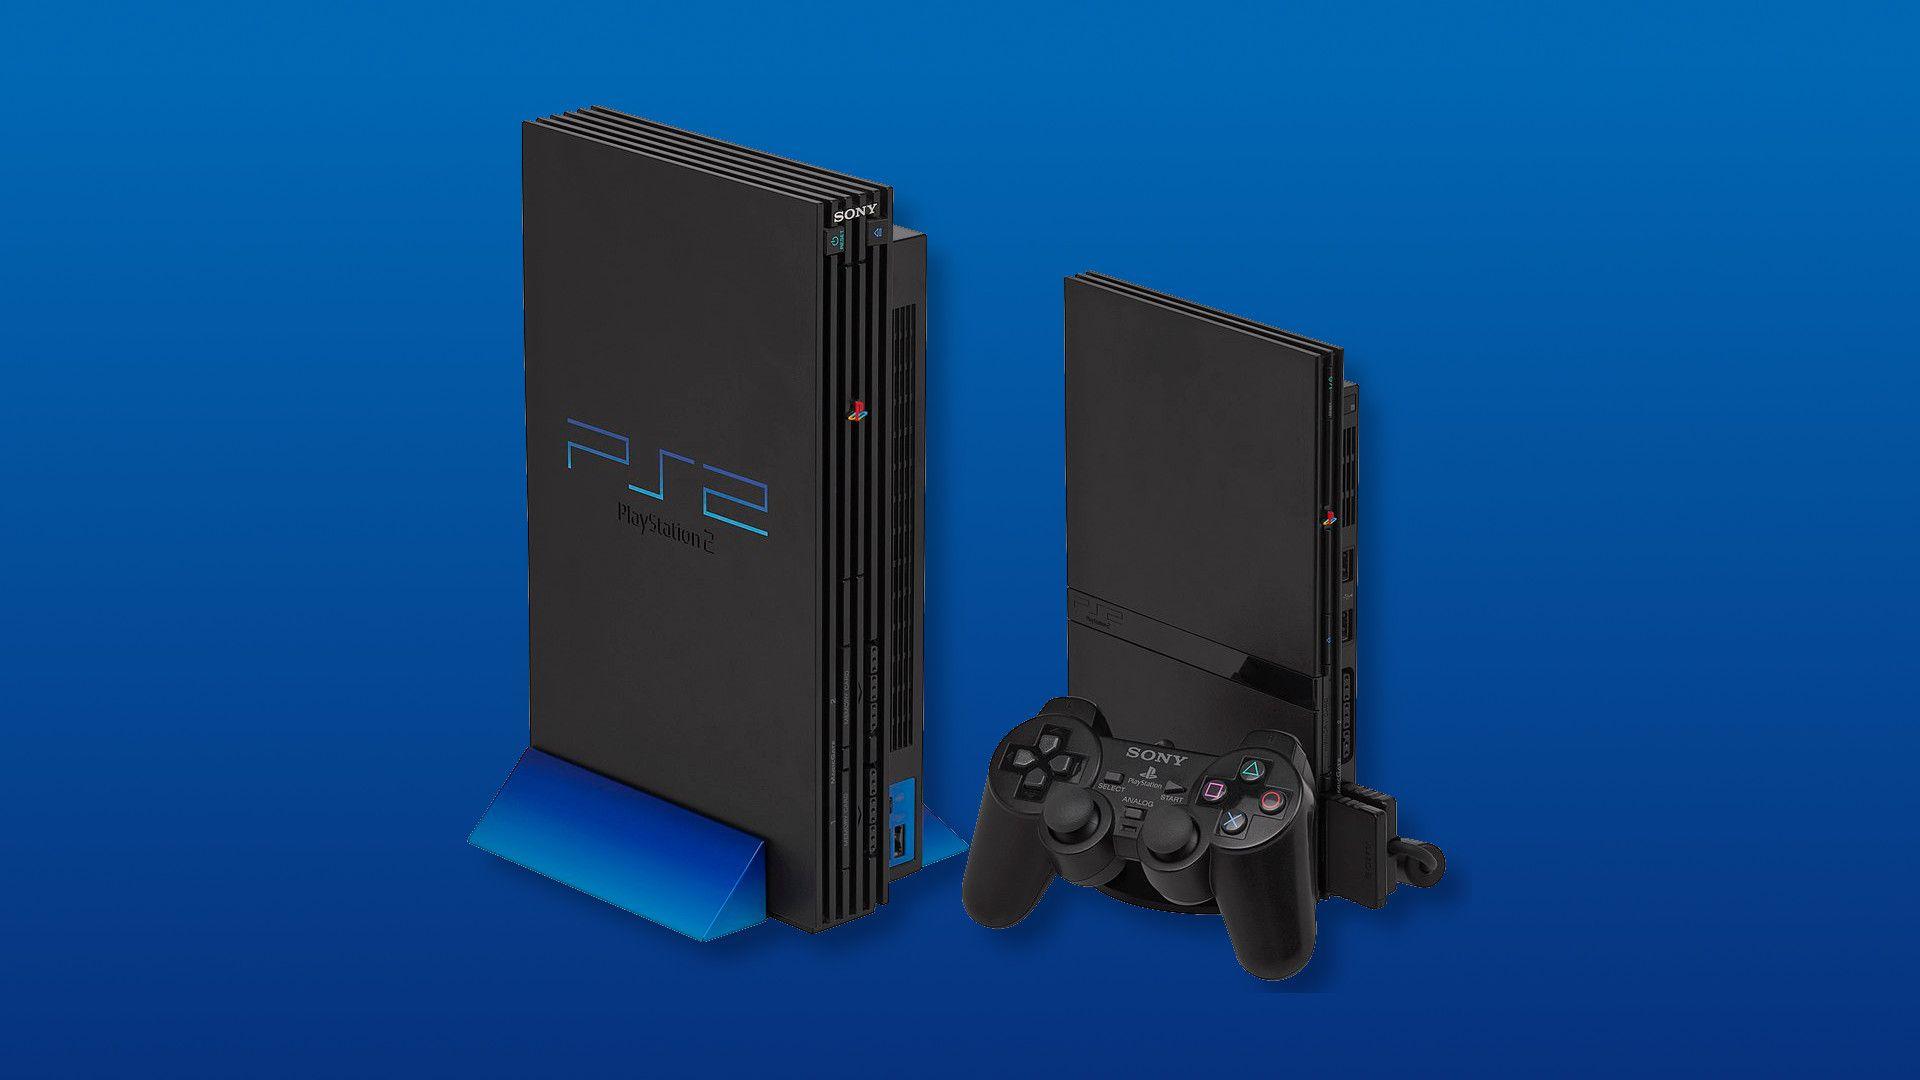 What Is PlayStation 2?